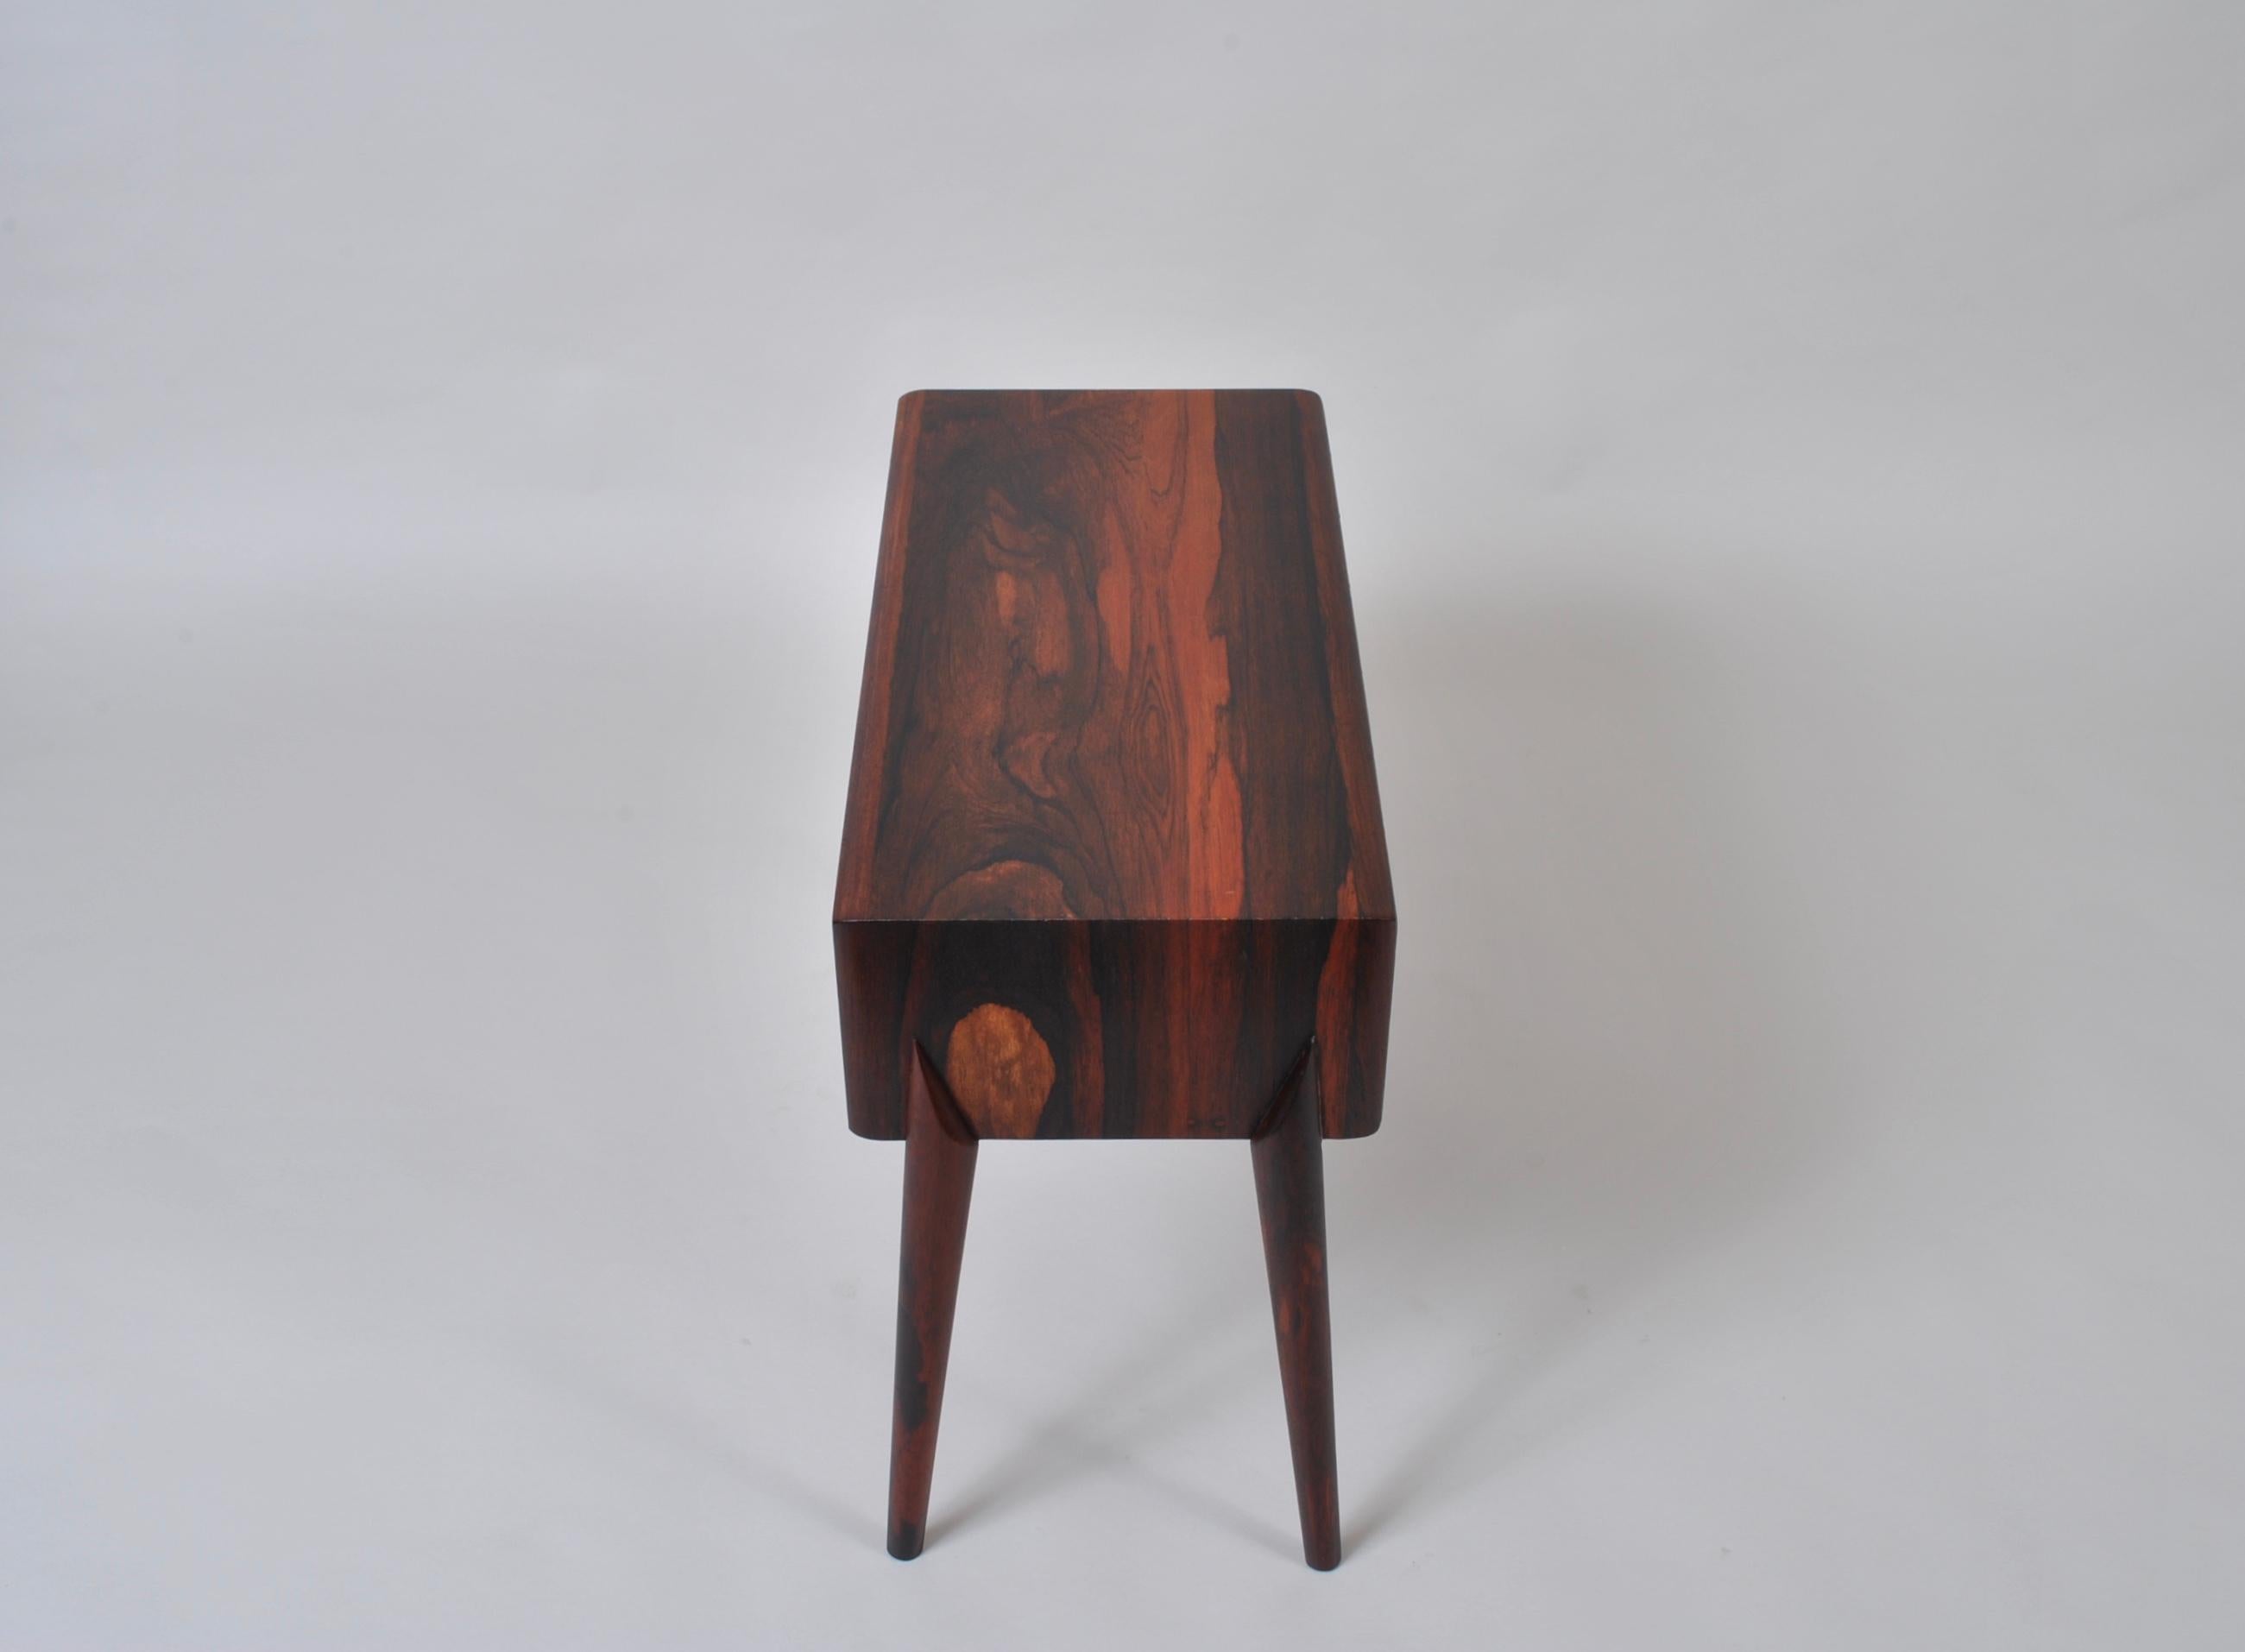 Utterly charming and striking little chest of drawers or side/end table by Rimbert Sandholdt for Glas & Tra Hovmantorp, Sweden, circa 1960. Incredible use of the rosewood veneers and beautifully sharp shaped legs.